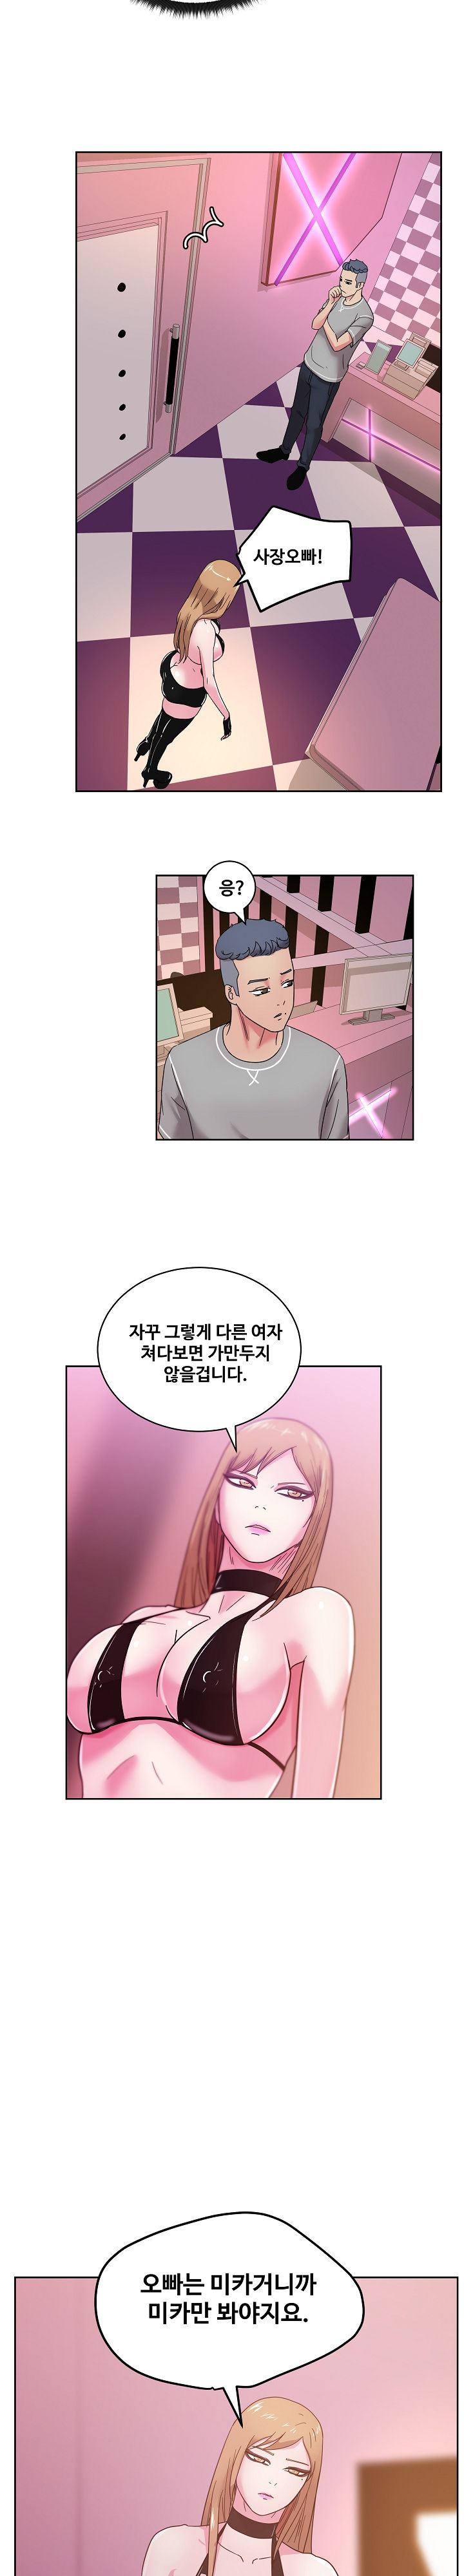 Sooyung Comic Shop Raw - Chapter 40 Page 7